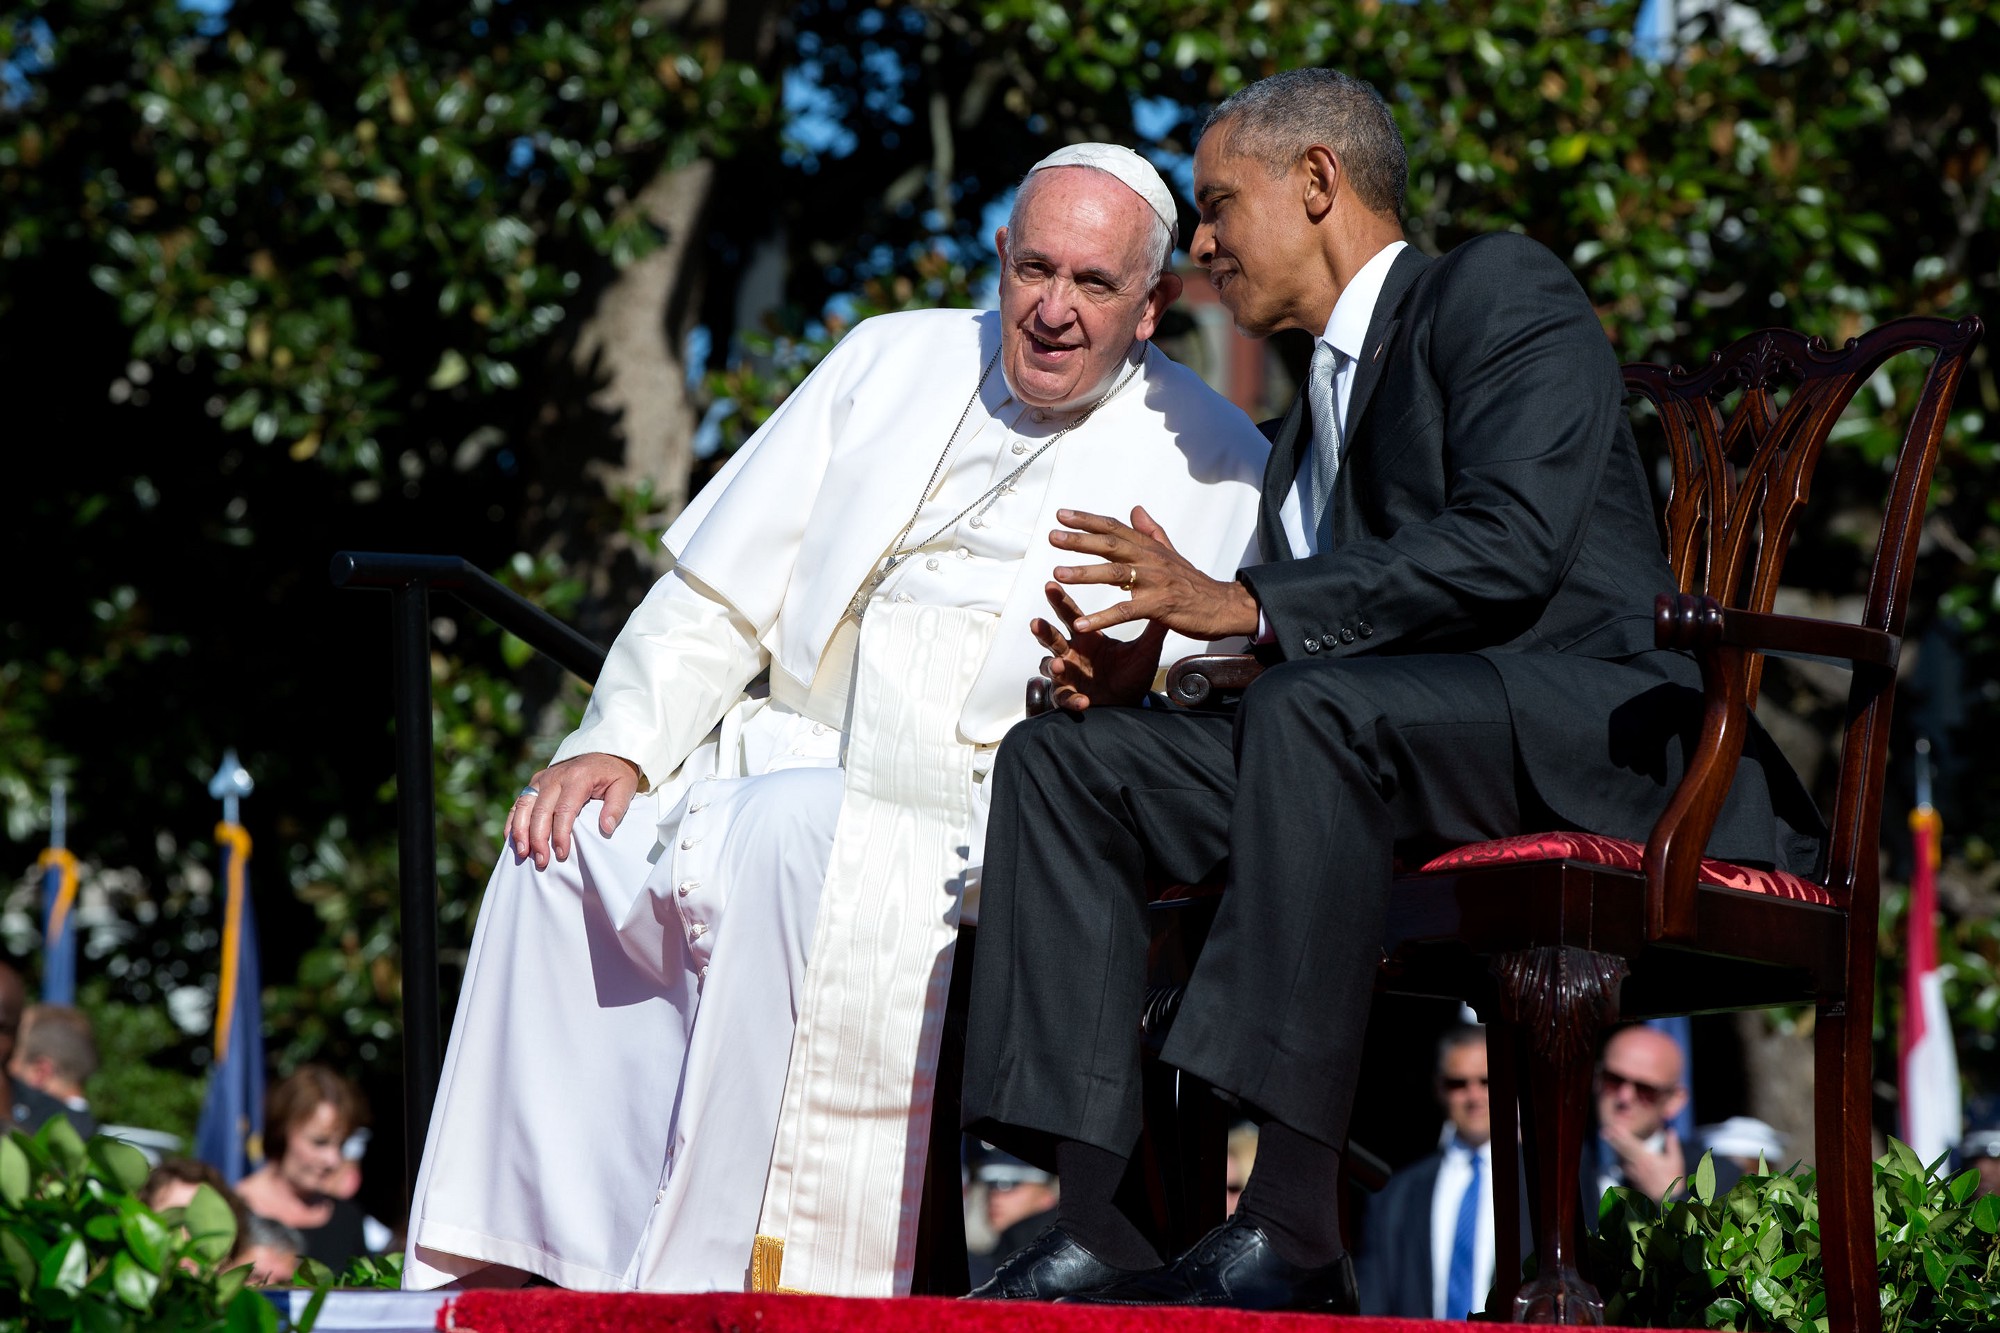 President Obama speaks to Pope Francis on stage. (Official White House Photo by Pete Souza)